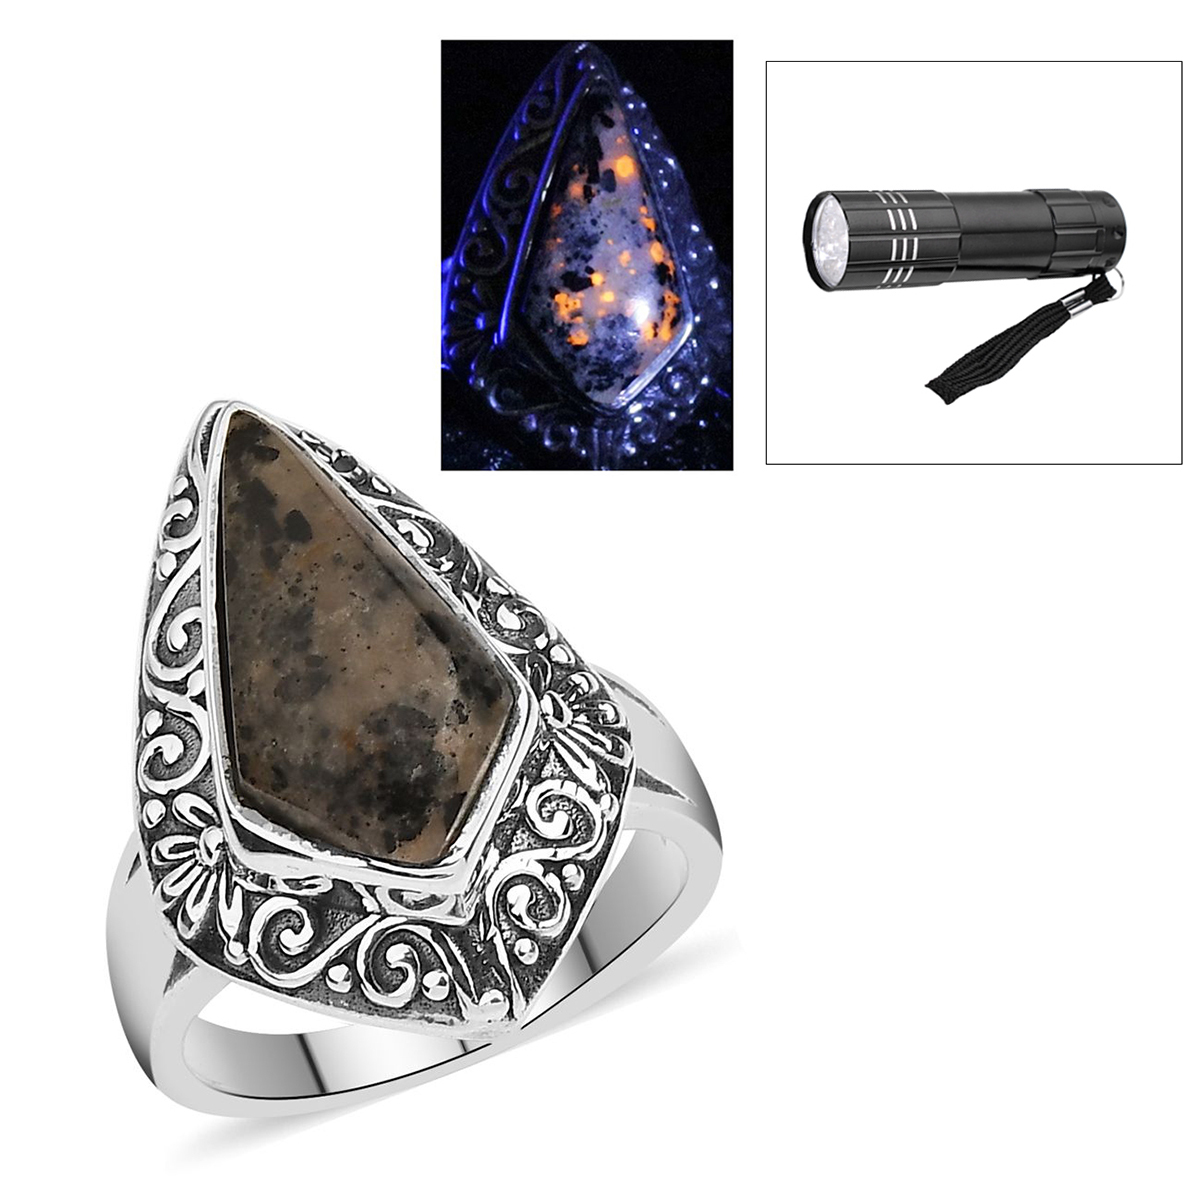 Artisan Crafted Natural Yooperlite Ring in Sterling Silver 6.75 ctw with Free UV Torch